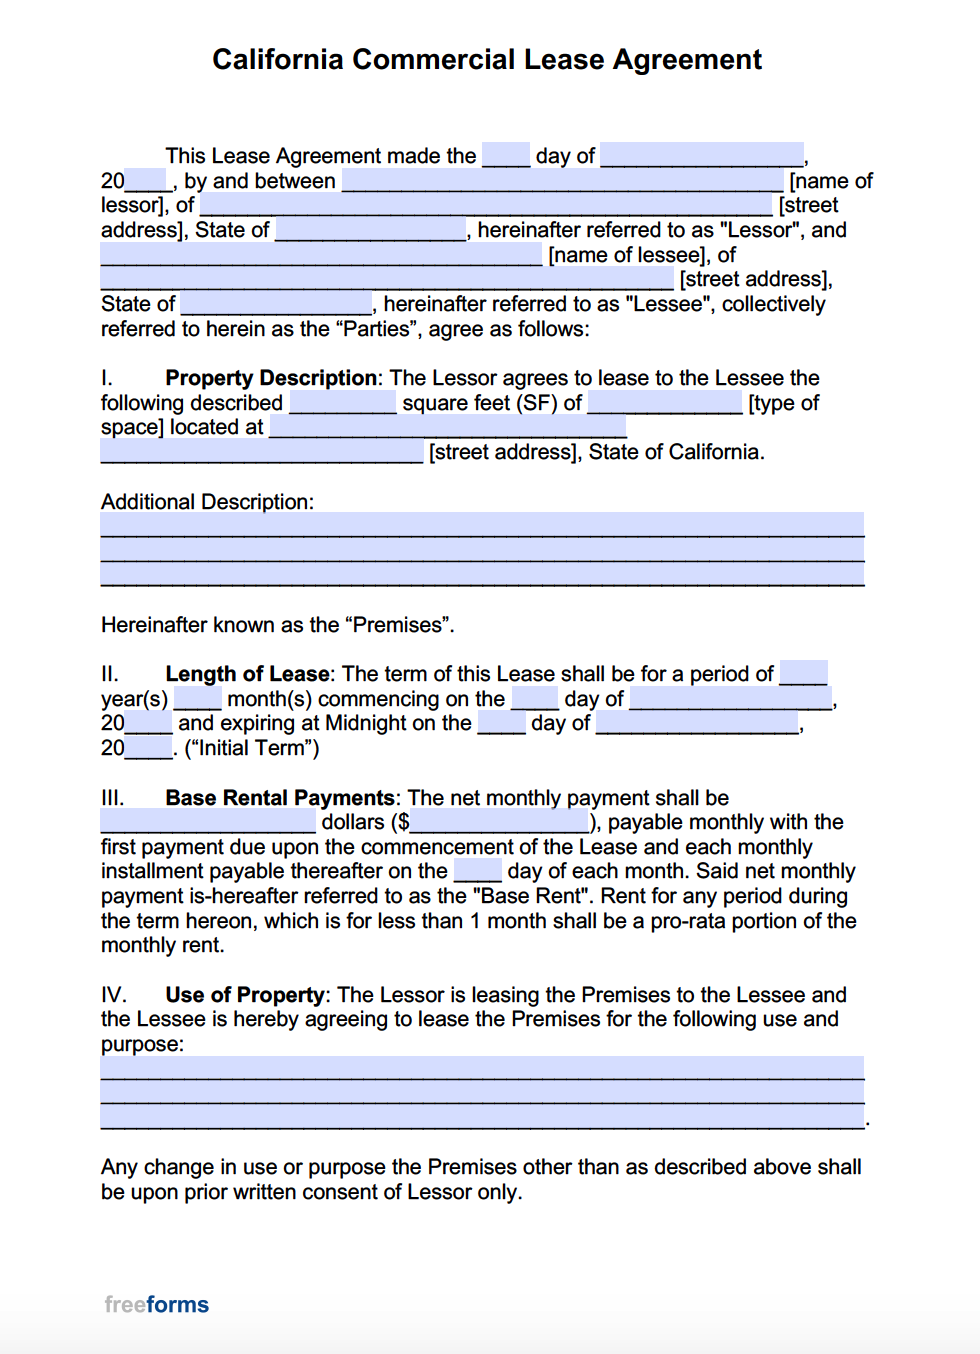 lease purchase agreement california